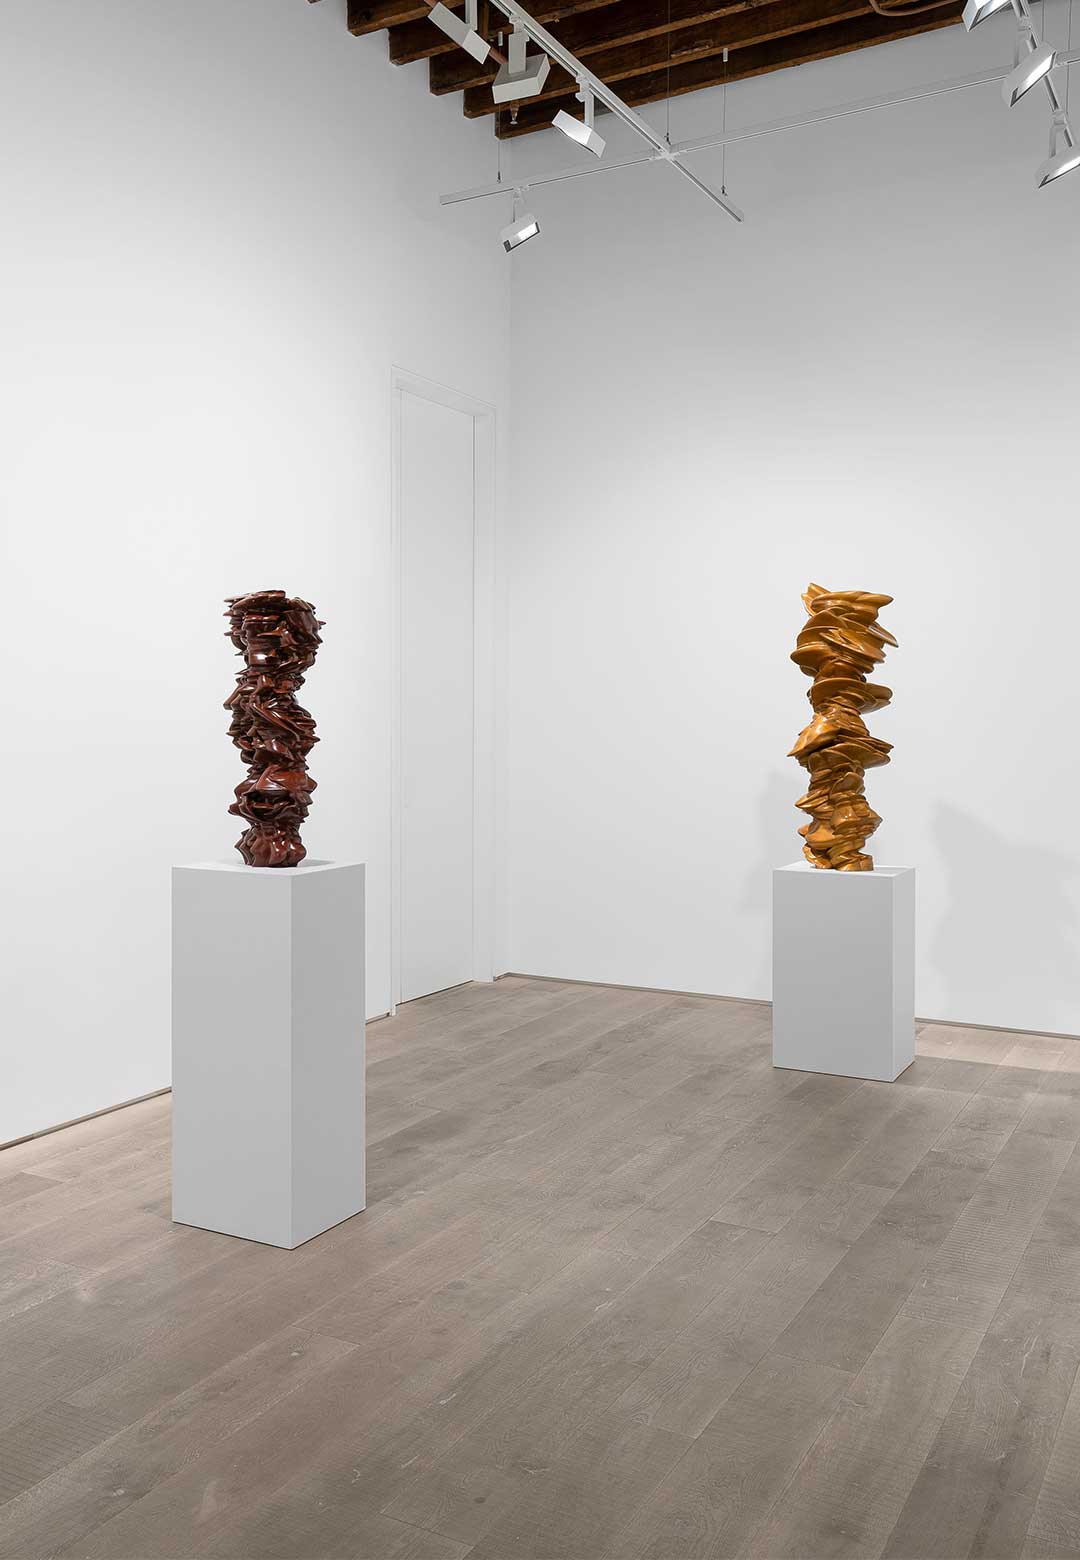 Lisson Gallery presents Tony Cragg’s first solo showcase in their Shanghai gallery